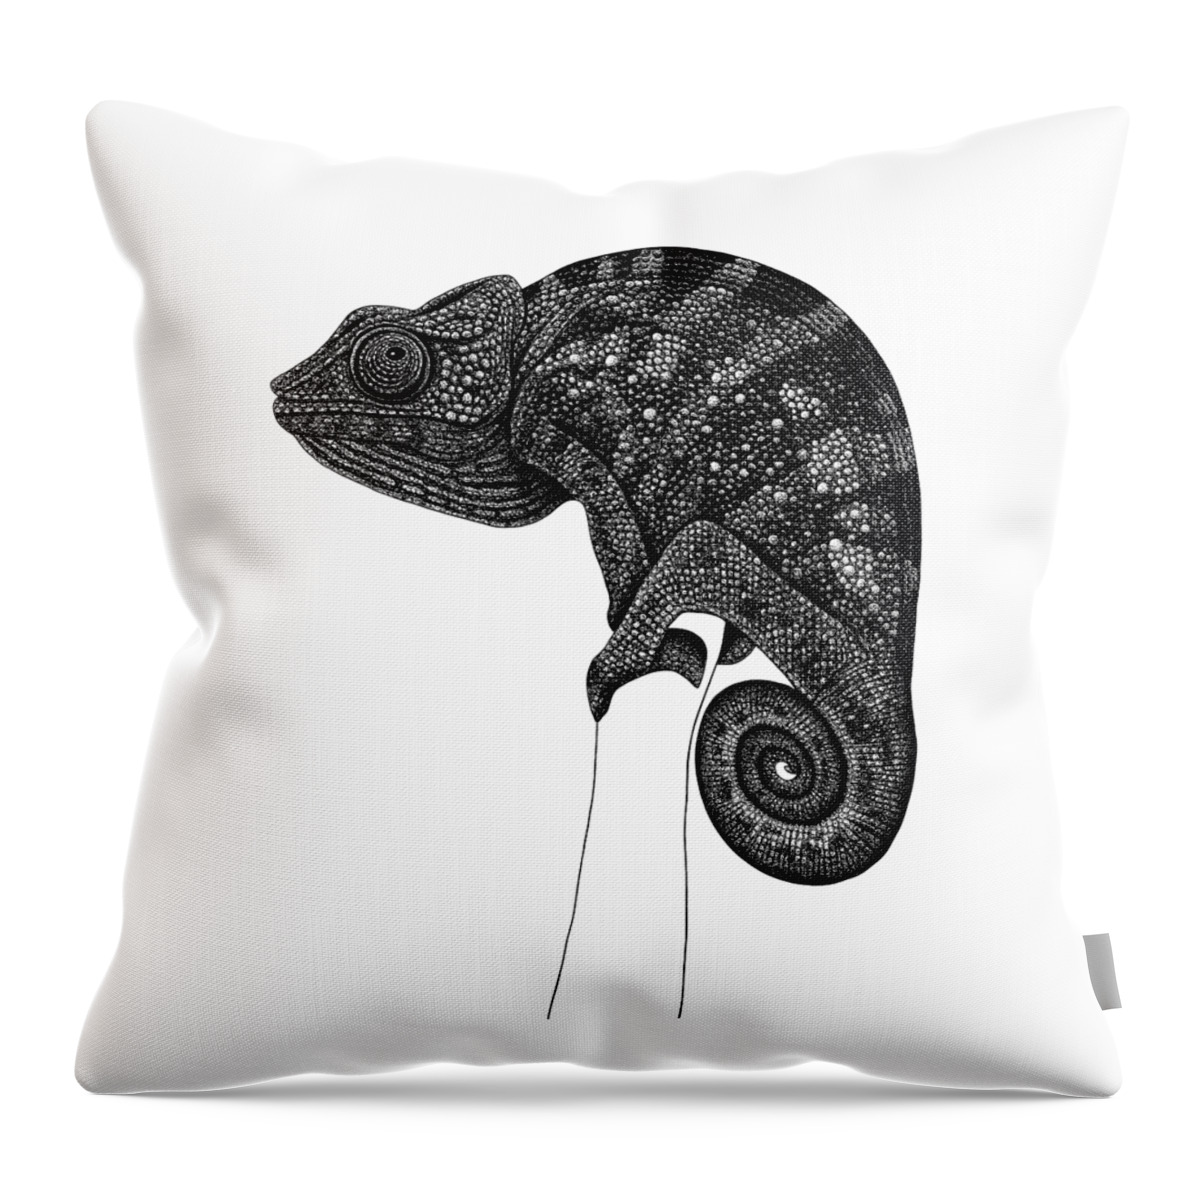 Chameleon Throw Pillow featuring the drawing Chameleon illustration by Loren Dowding